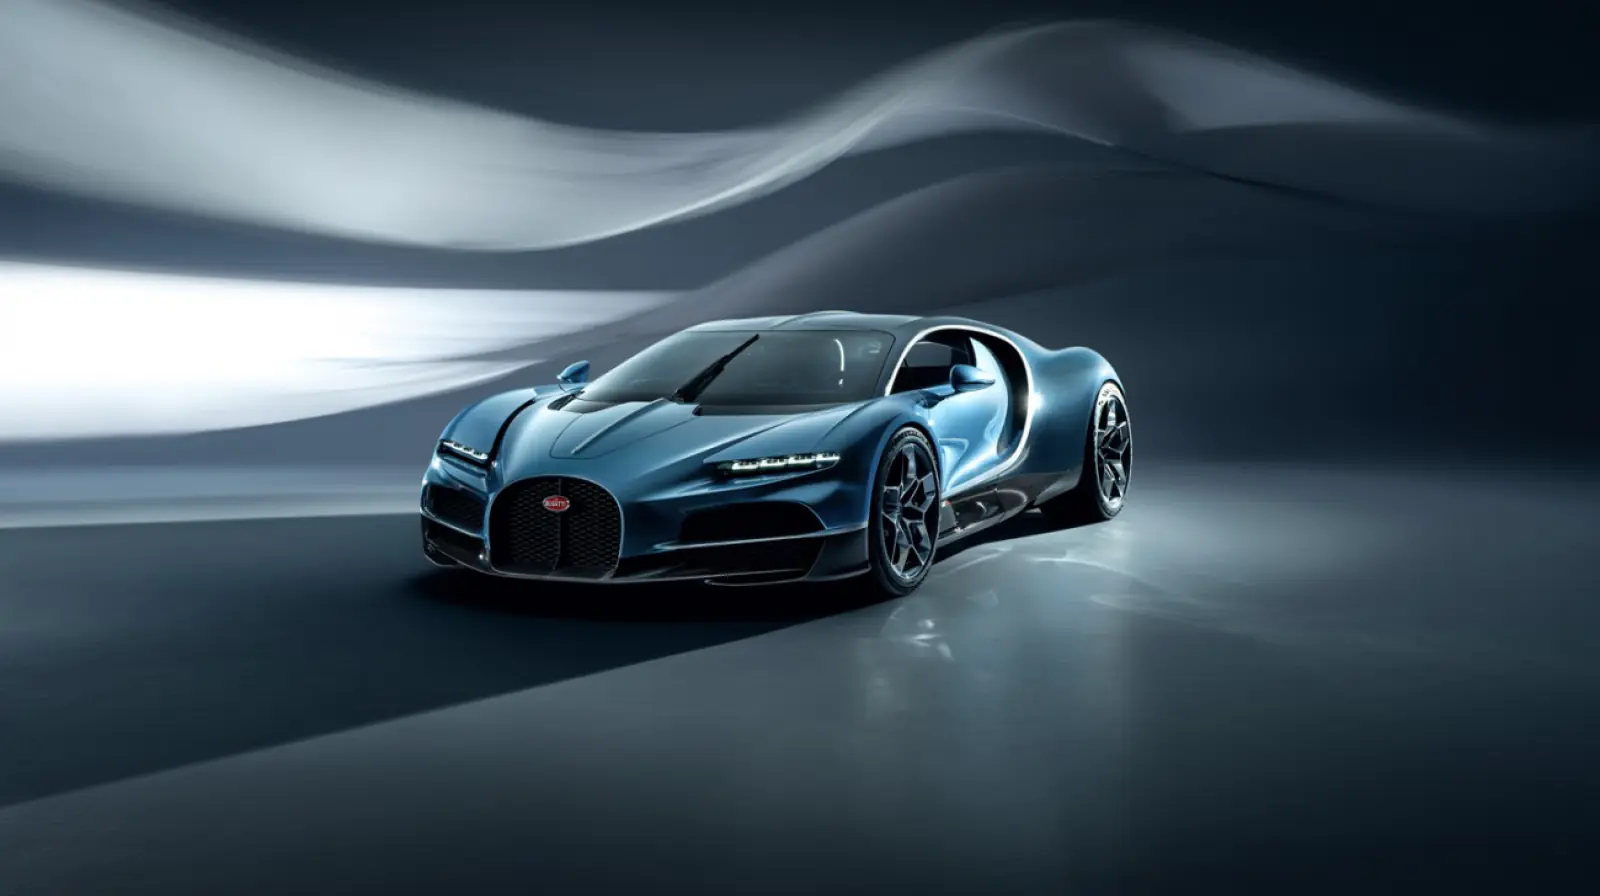 Bugatti introduced its first hybrid car, catches the speed of 96 in 2 seconds, know the price